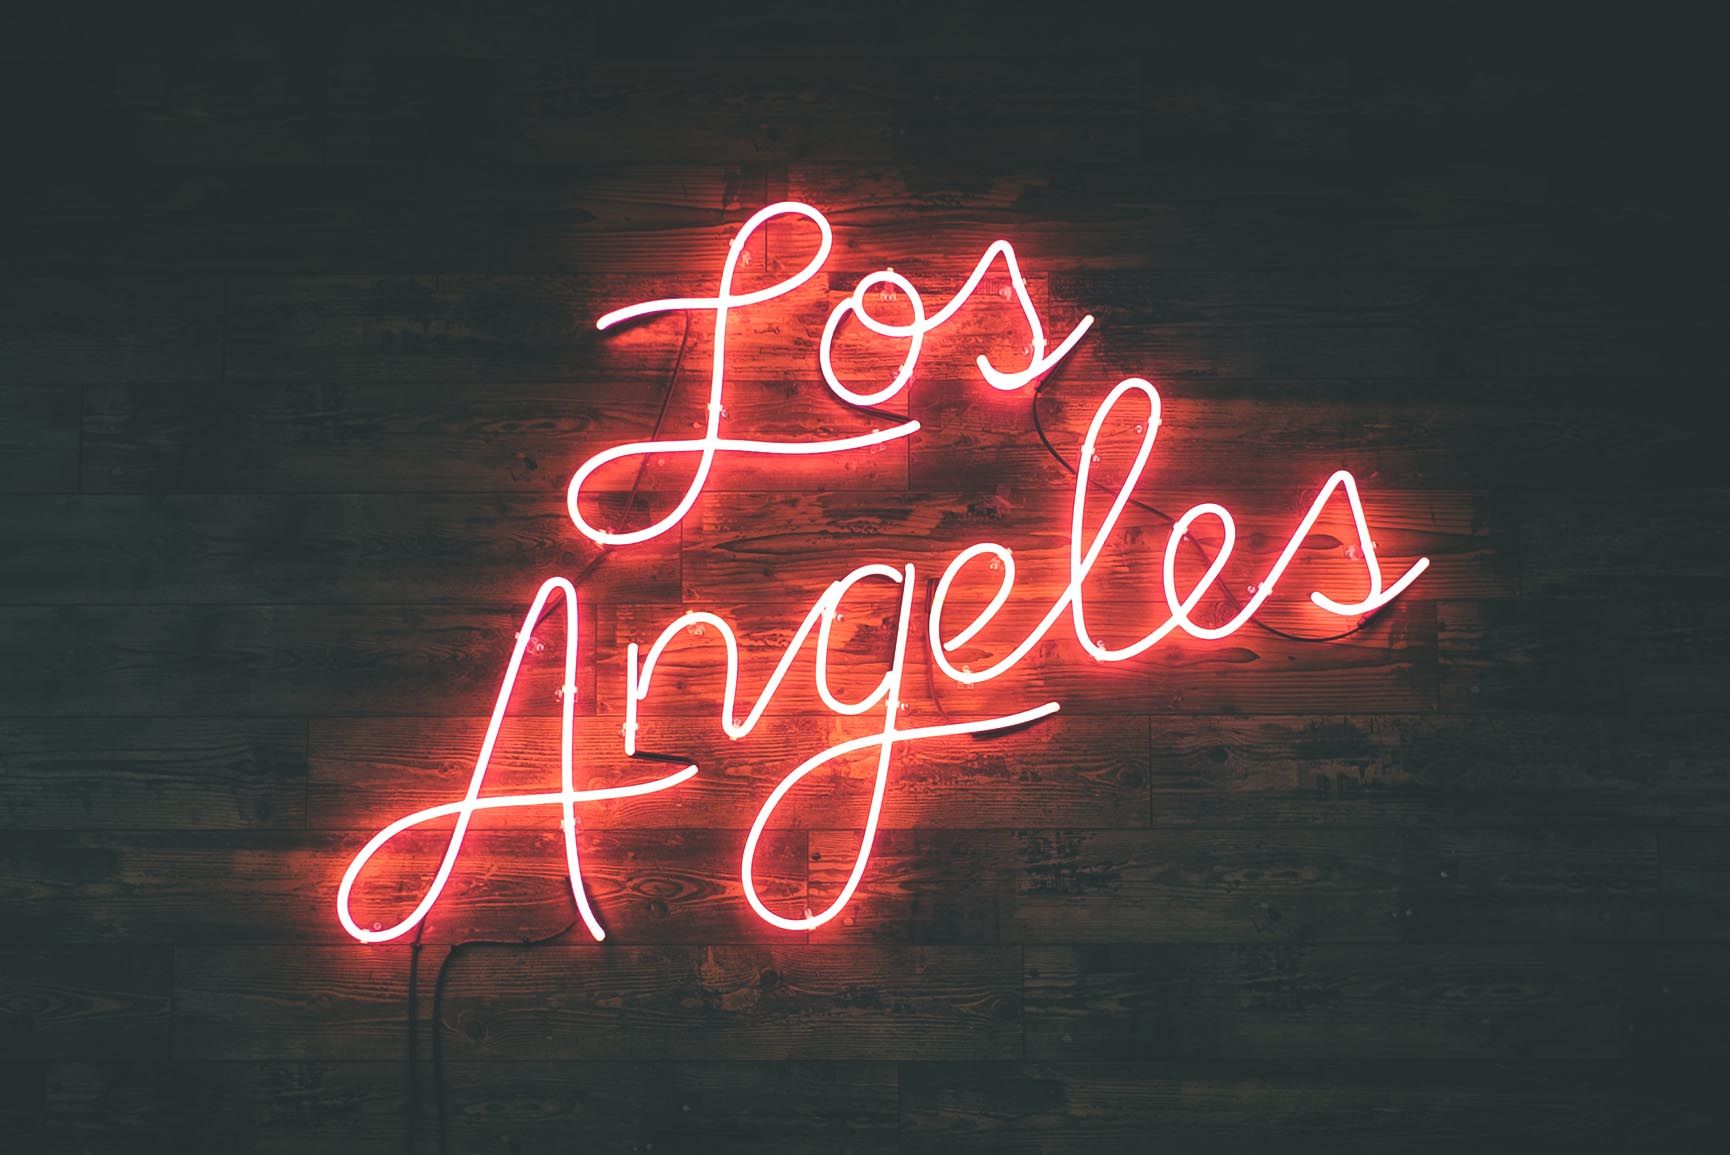 A neon sign that says los angeles - Los Angeles